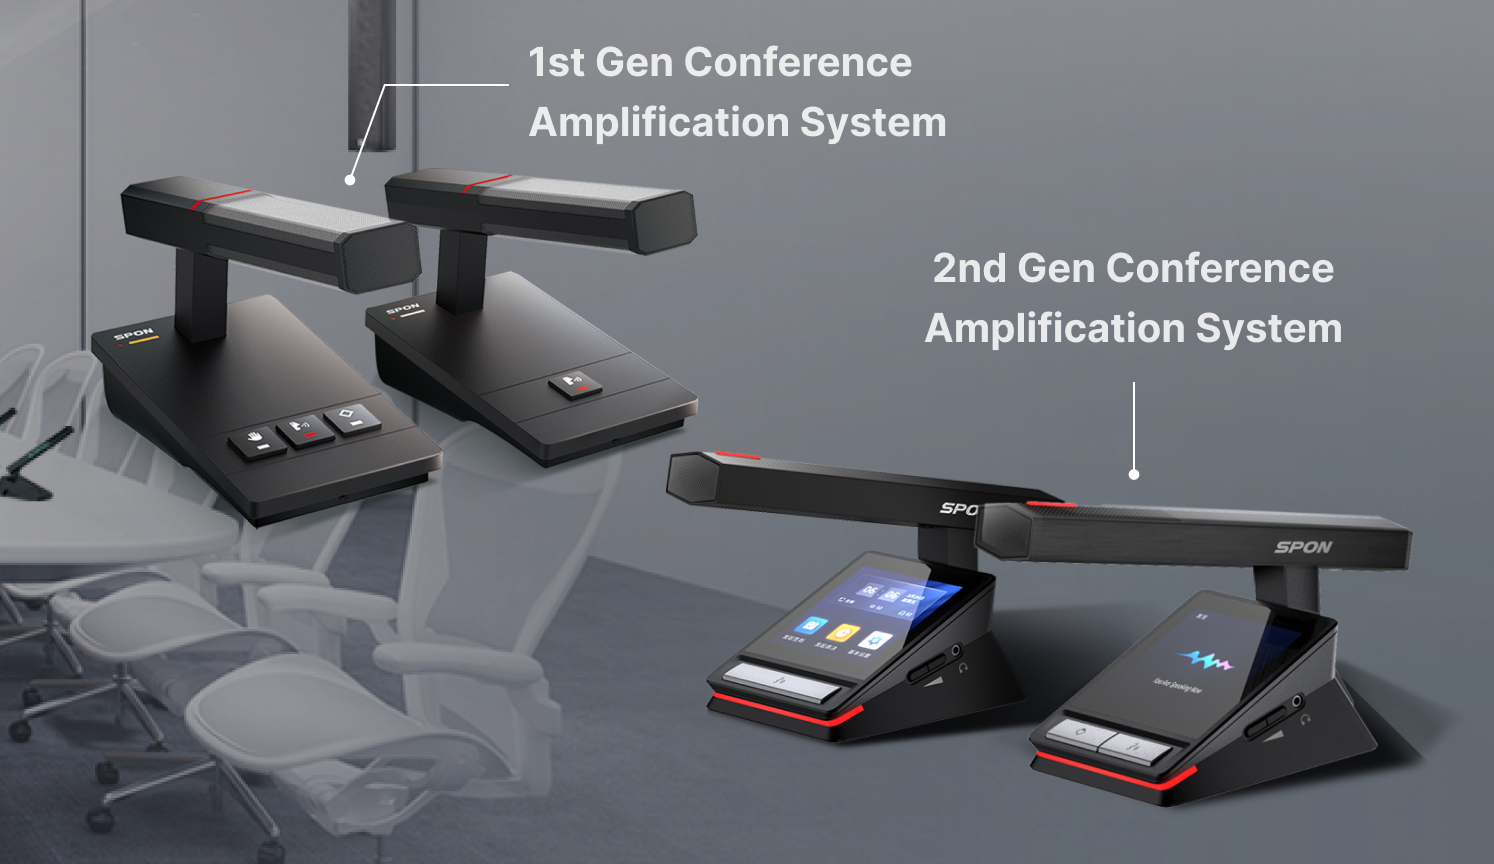 Evolving Digital Conference Systems: A Comparison of SPON's First and Second Generations